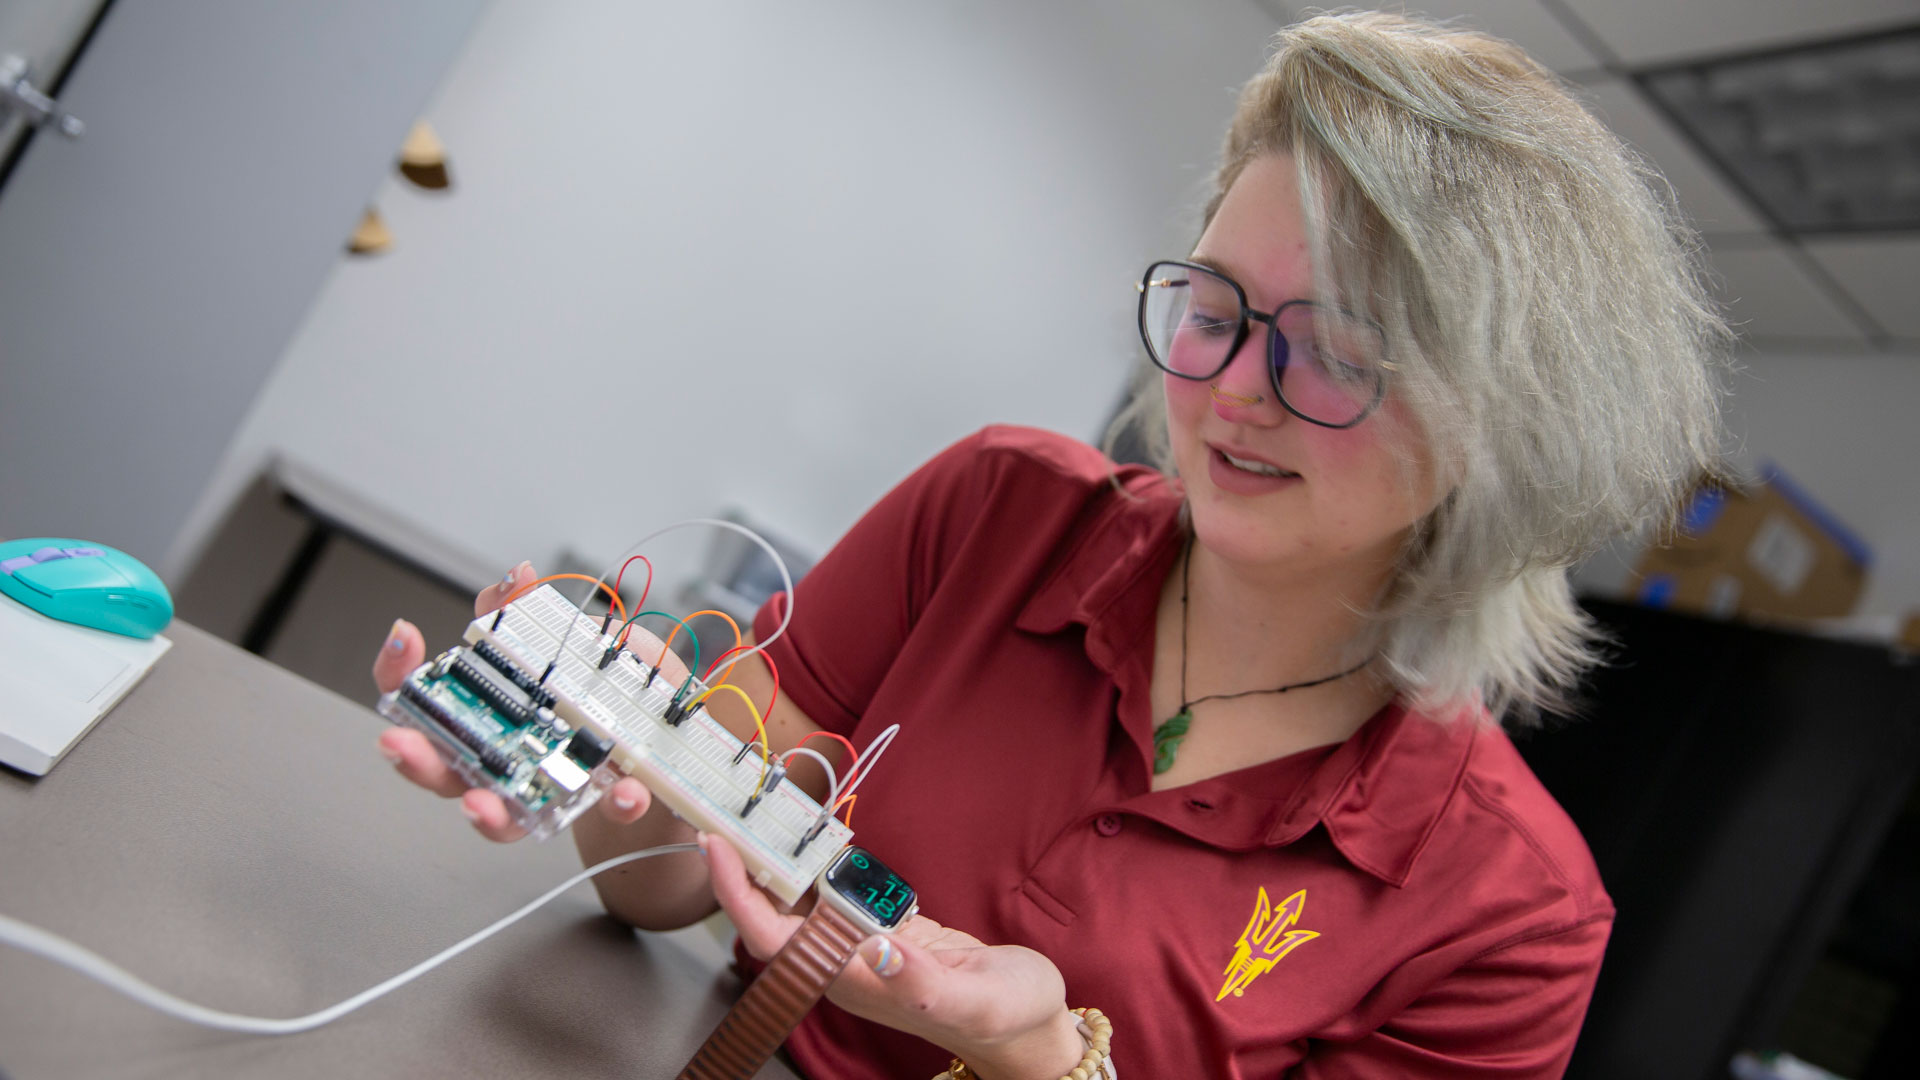 Engineering major Gwen Eging is working on a FURI research project to design batteries that are charged by movement for applications such as wearables.